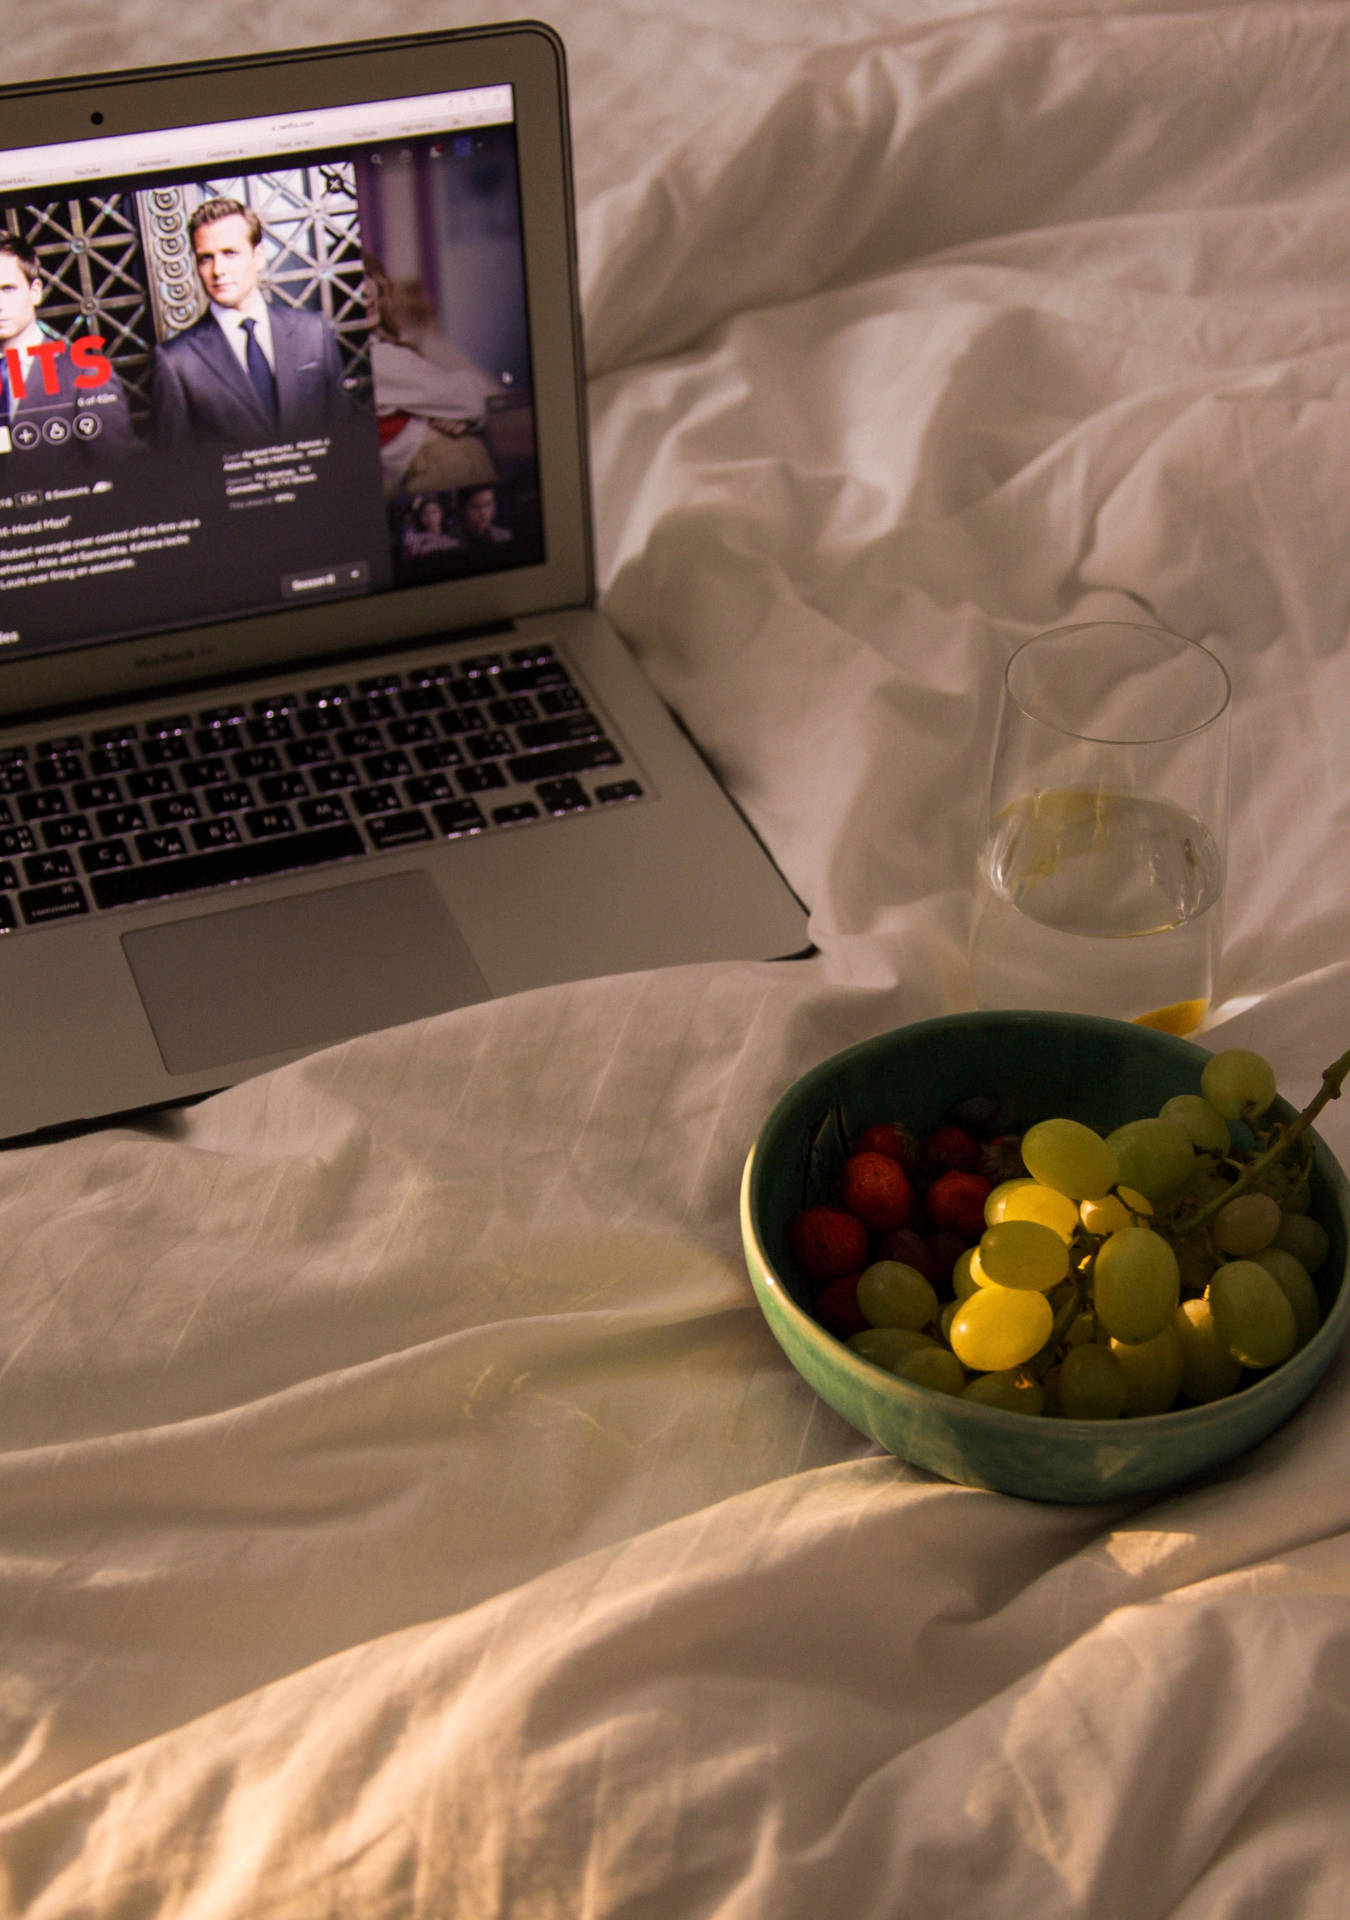 Netflix And Chill In Bed